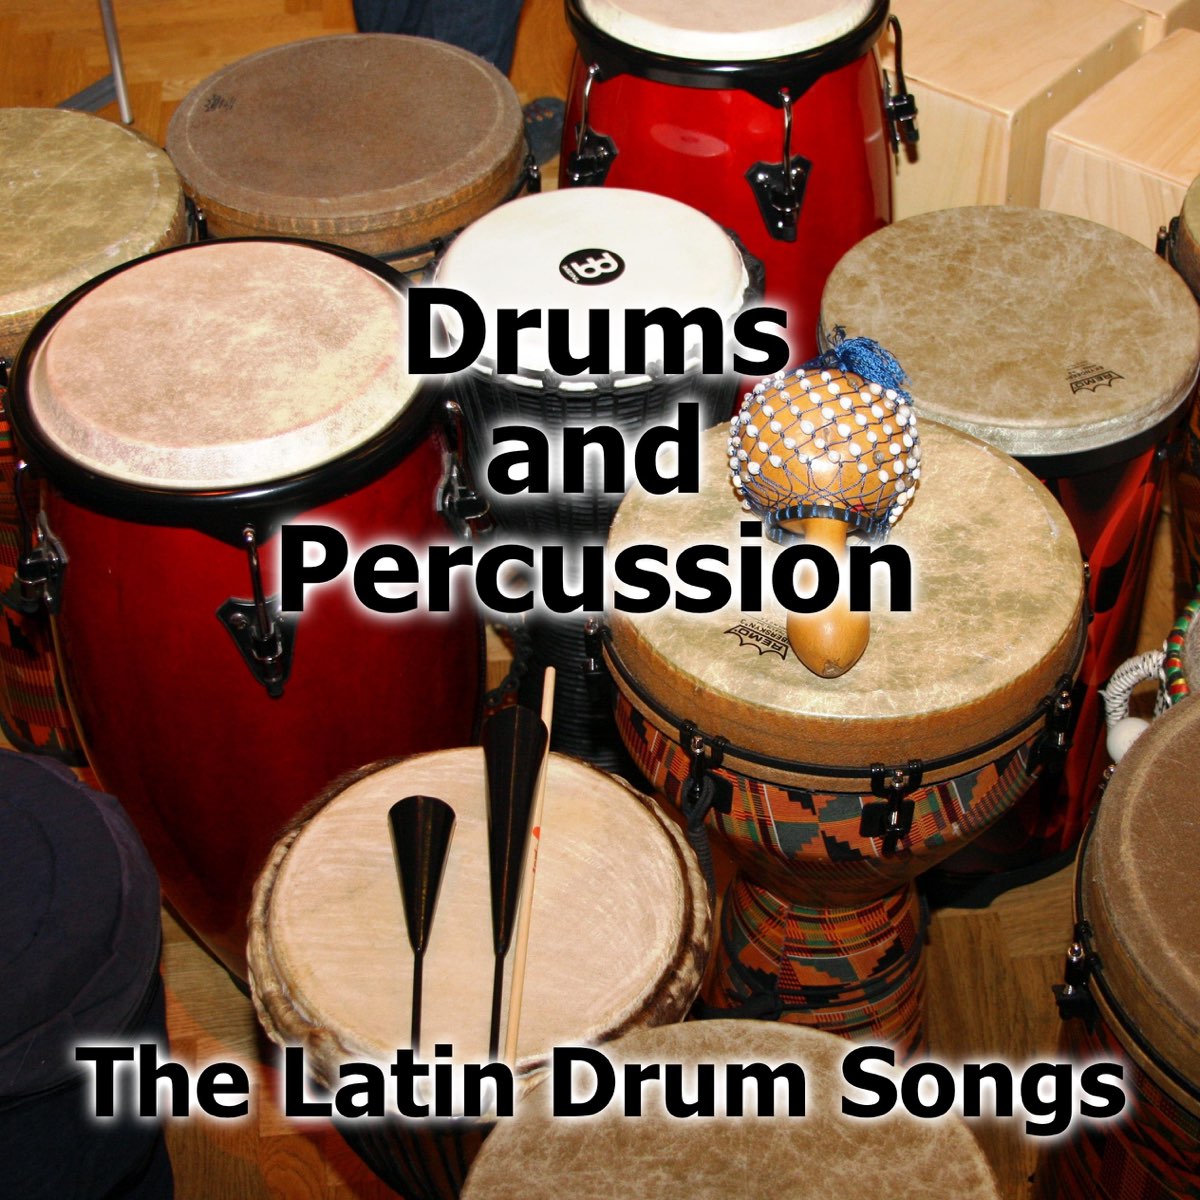 Drums and Percussion - The Latin Drum Songs by Drum Tracks on Apple Music